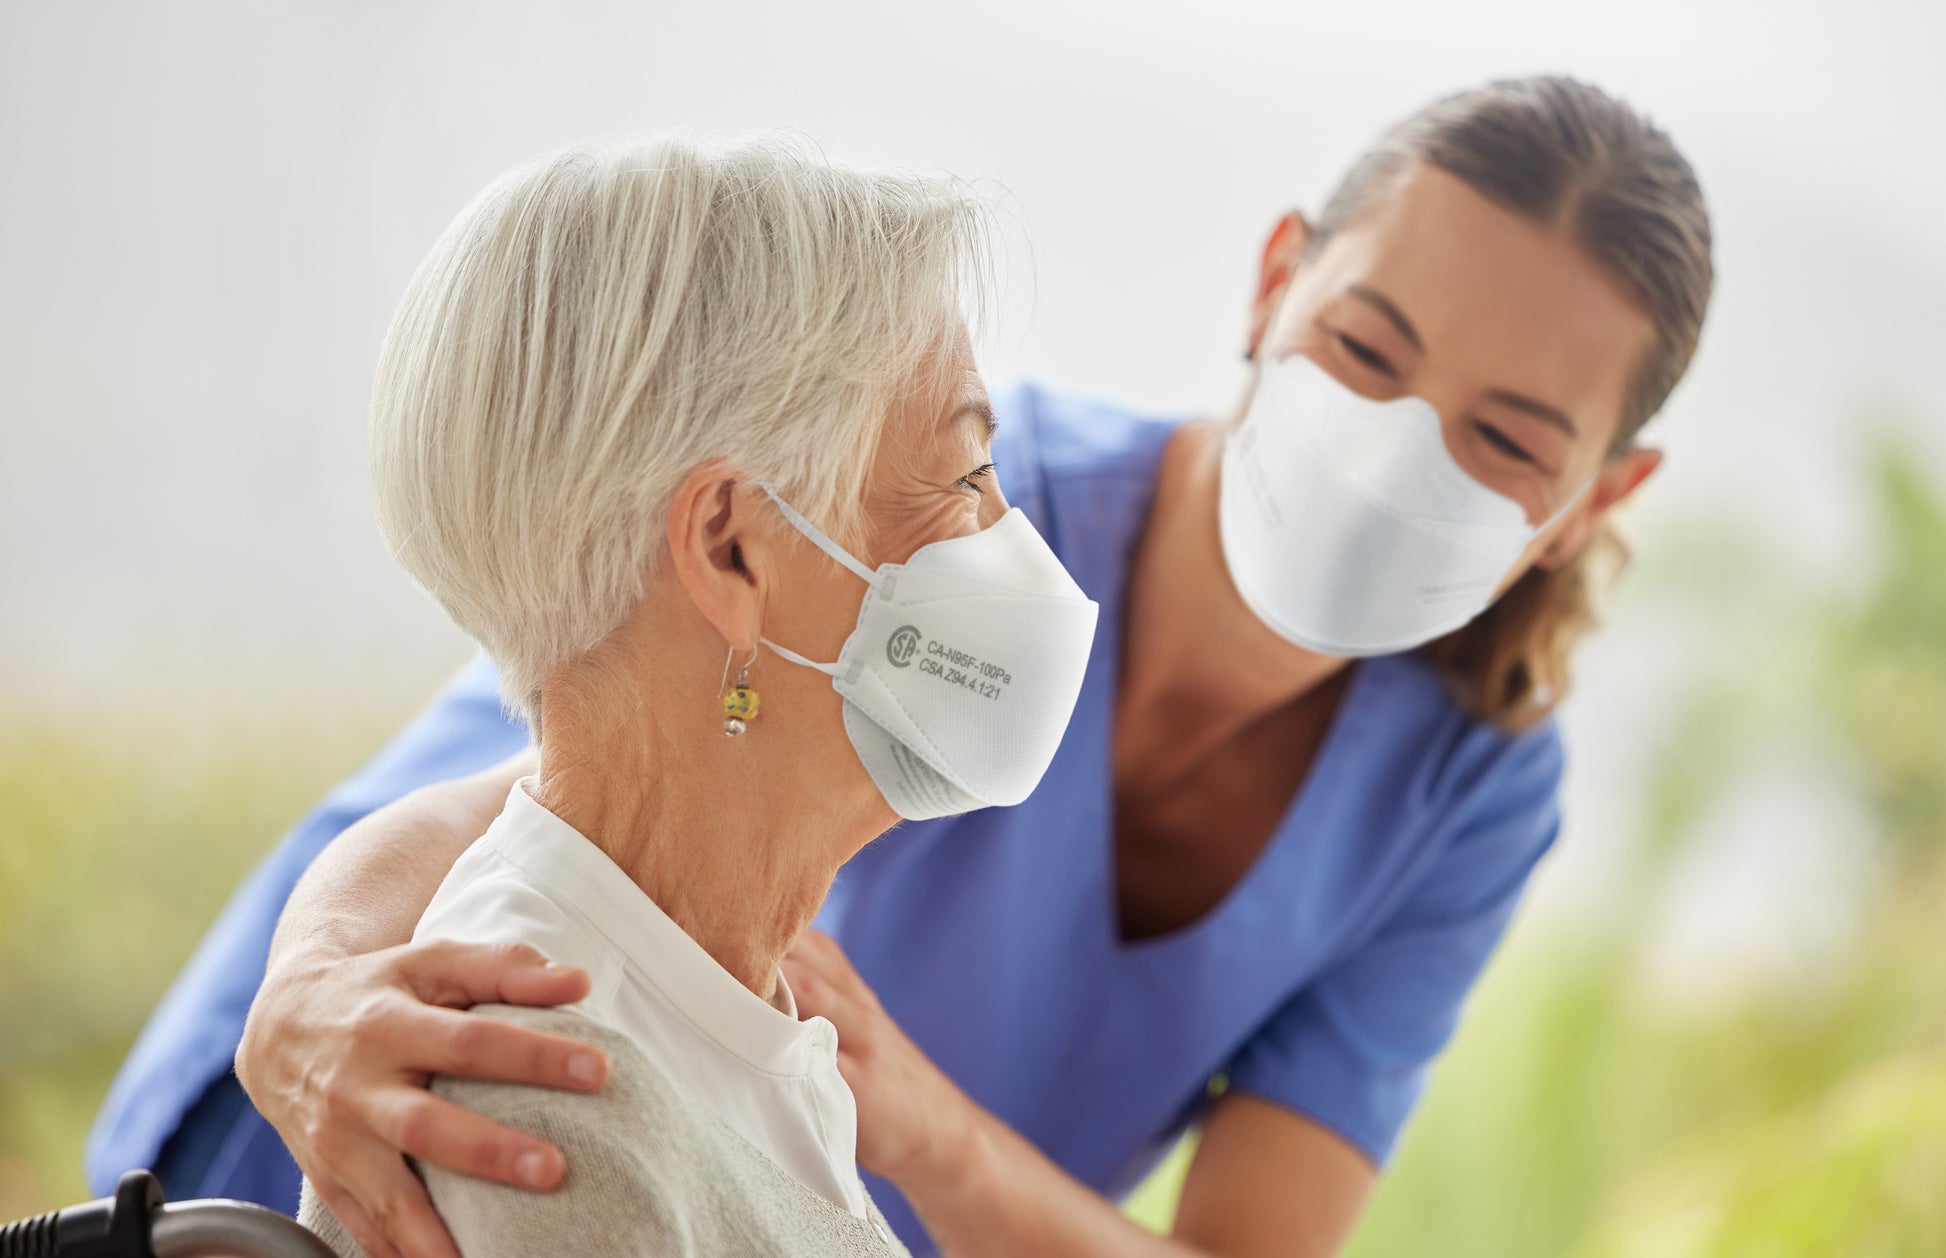 Health care worker nurse and patient wearing Canada Masq Q100 CSA respirator face mask